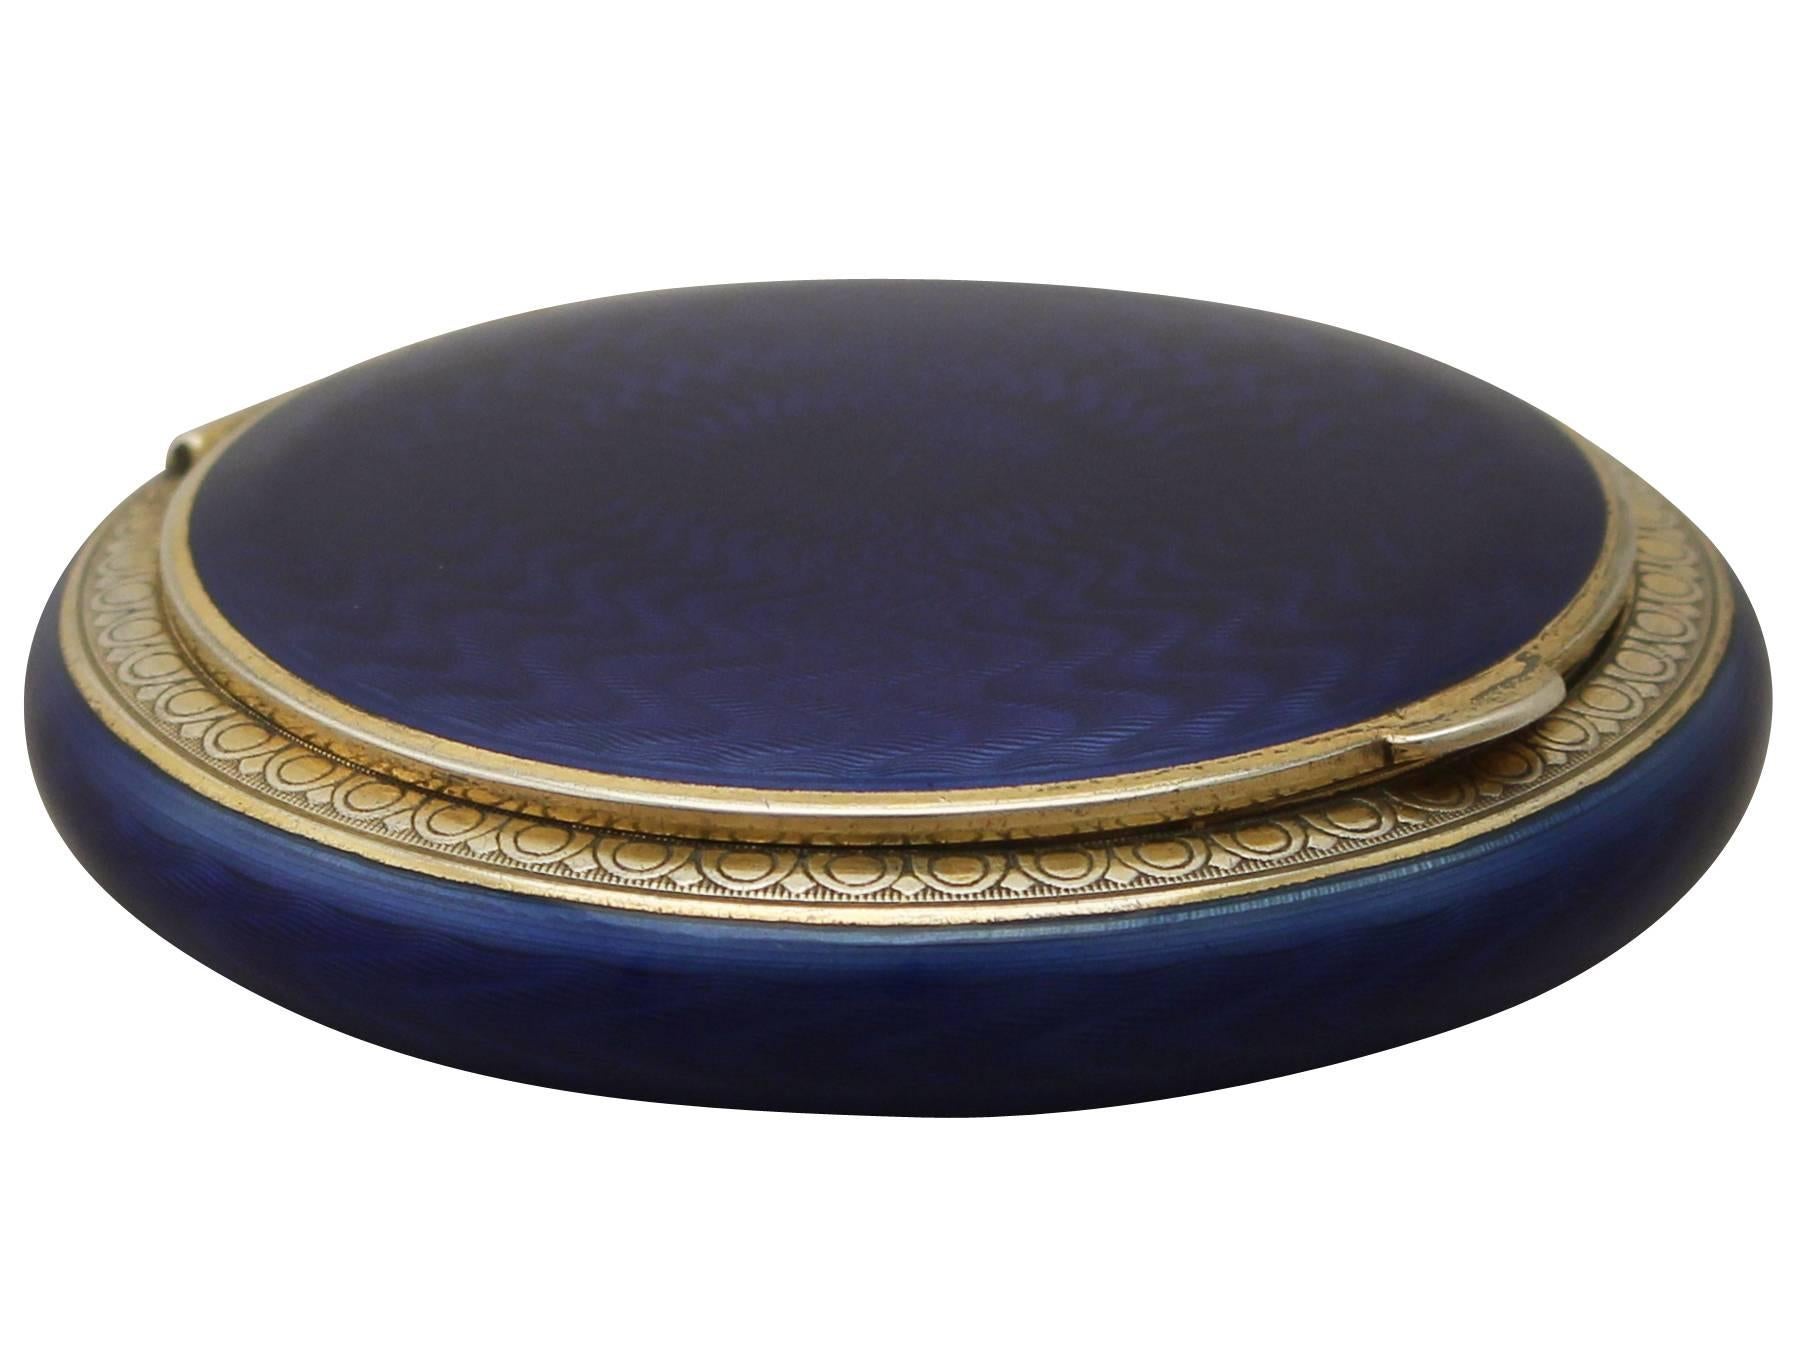 This exceptional antique Norwegian sterling silver gilt and enamel compact has a circular rounded form.

The rounded anterior surface of the body and cover are embellished with blue guilloche enamel, each accented with an impressive gilded silver